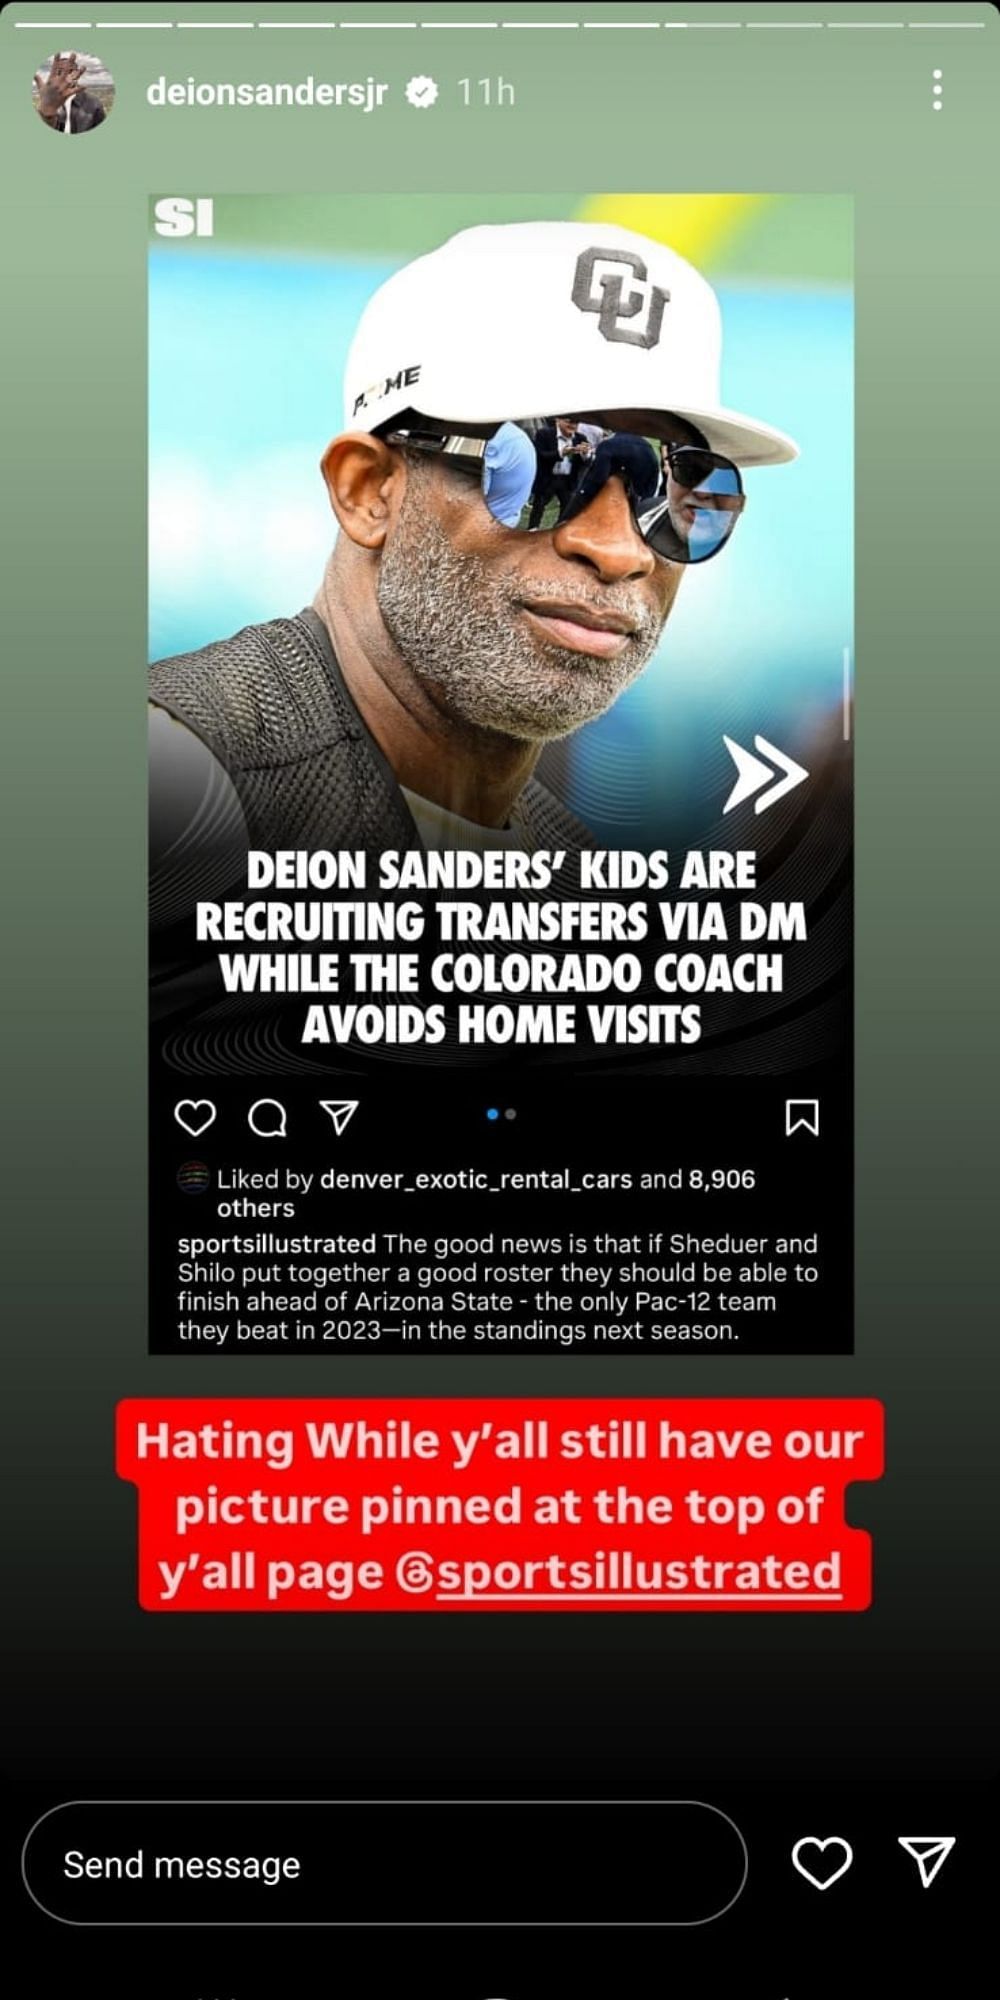 Deion Sanders Jr. lashed out at Sports Illustrated.